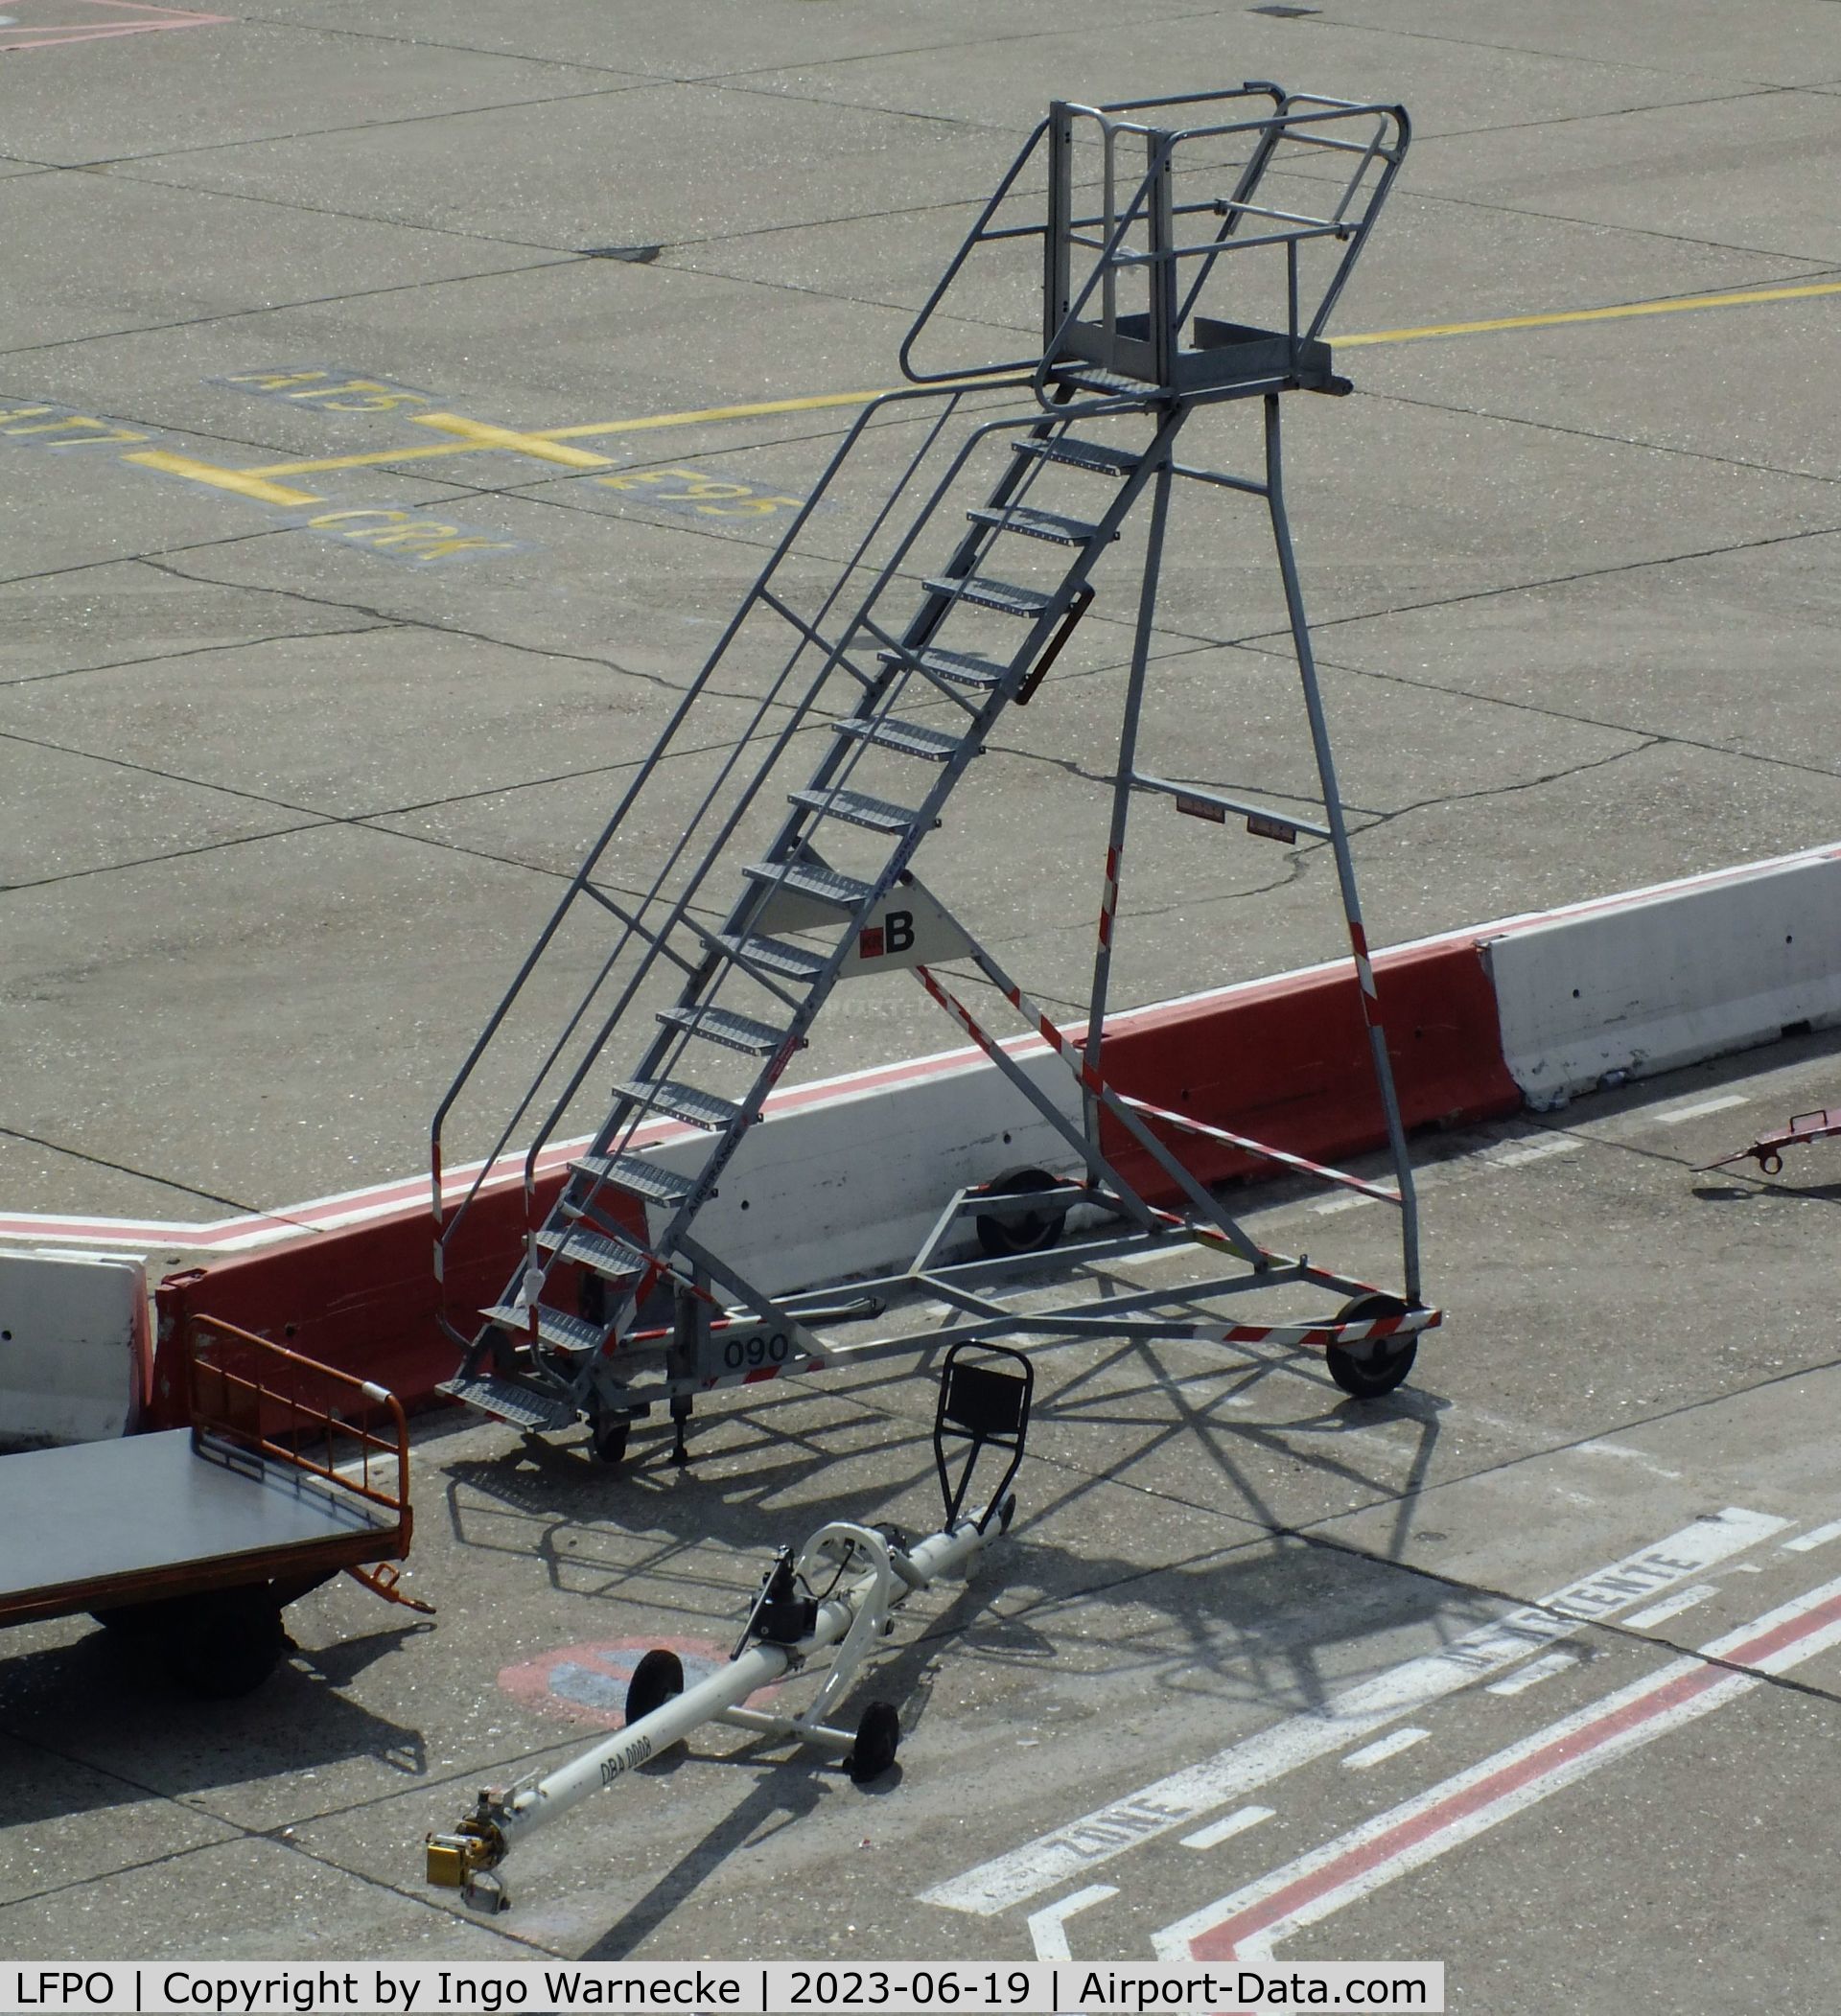 Paris Orly Airport, Orly (near Paris) France (LFPO) - towed stairs (for servicing / maintenance?) at Paris/Orly airport